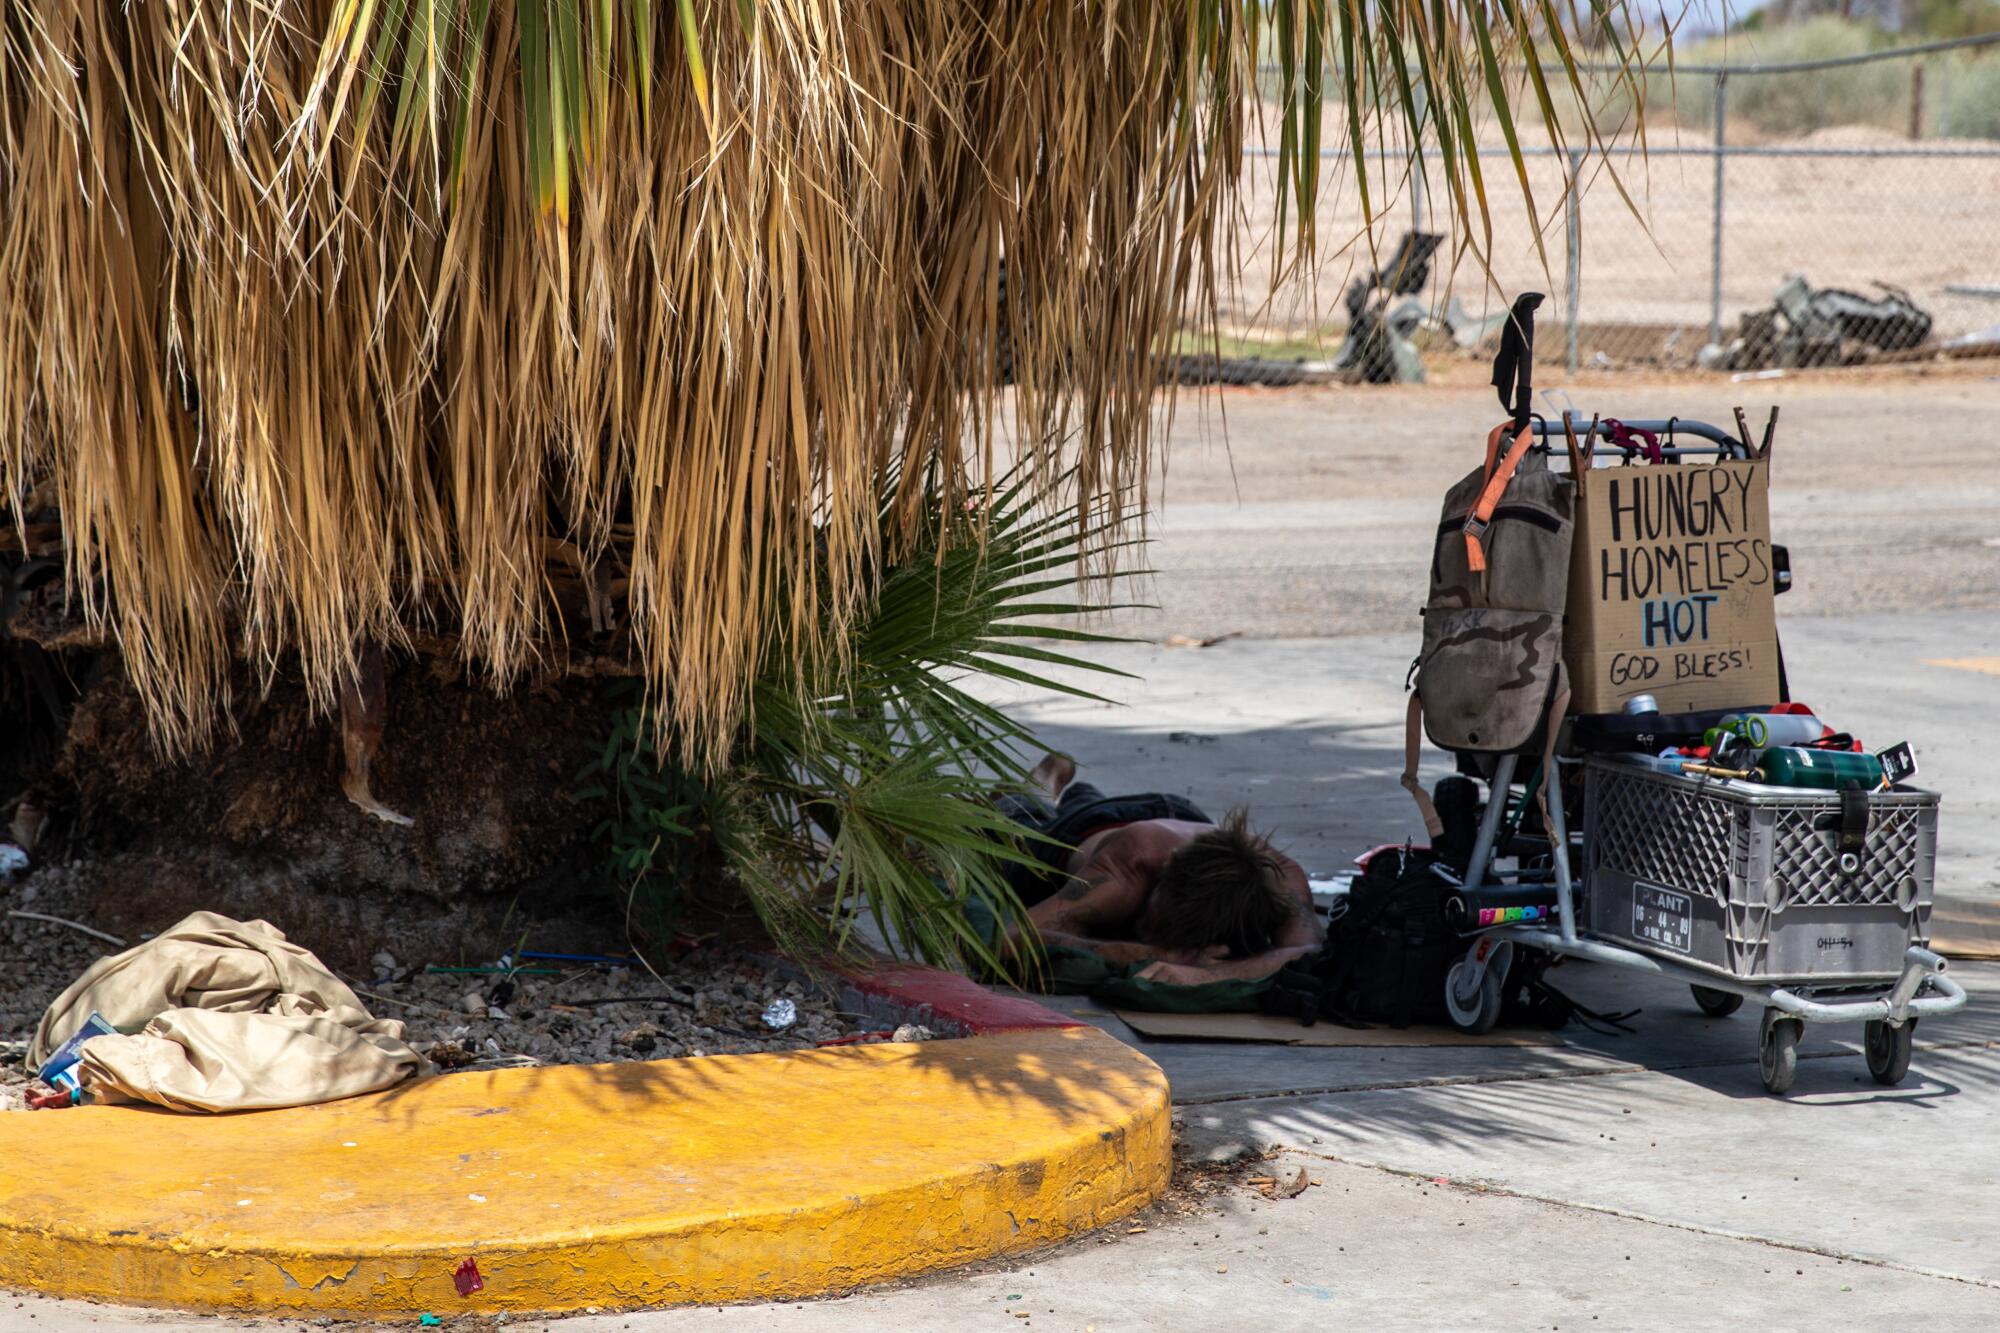 A homeless man sleeps in the shade of a tree in Blythe. Next to him is a cart of his belongings.